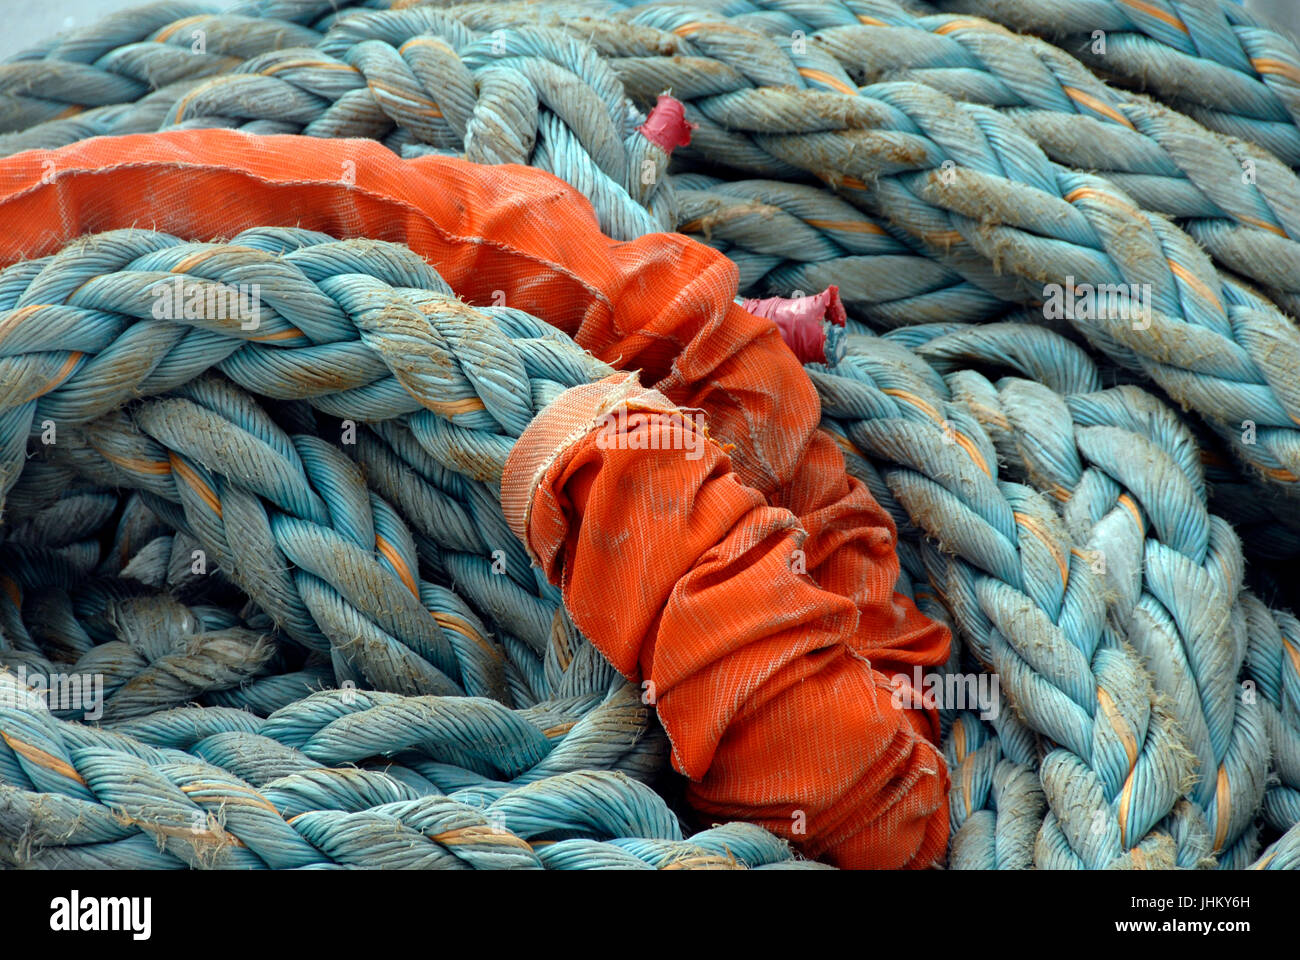 Heavy-duty rope as might be used for mooring a ship Stock Photo